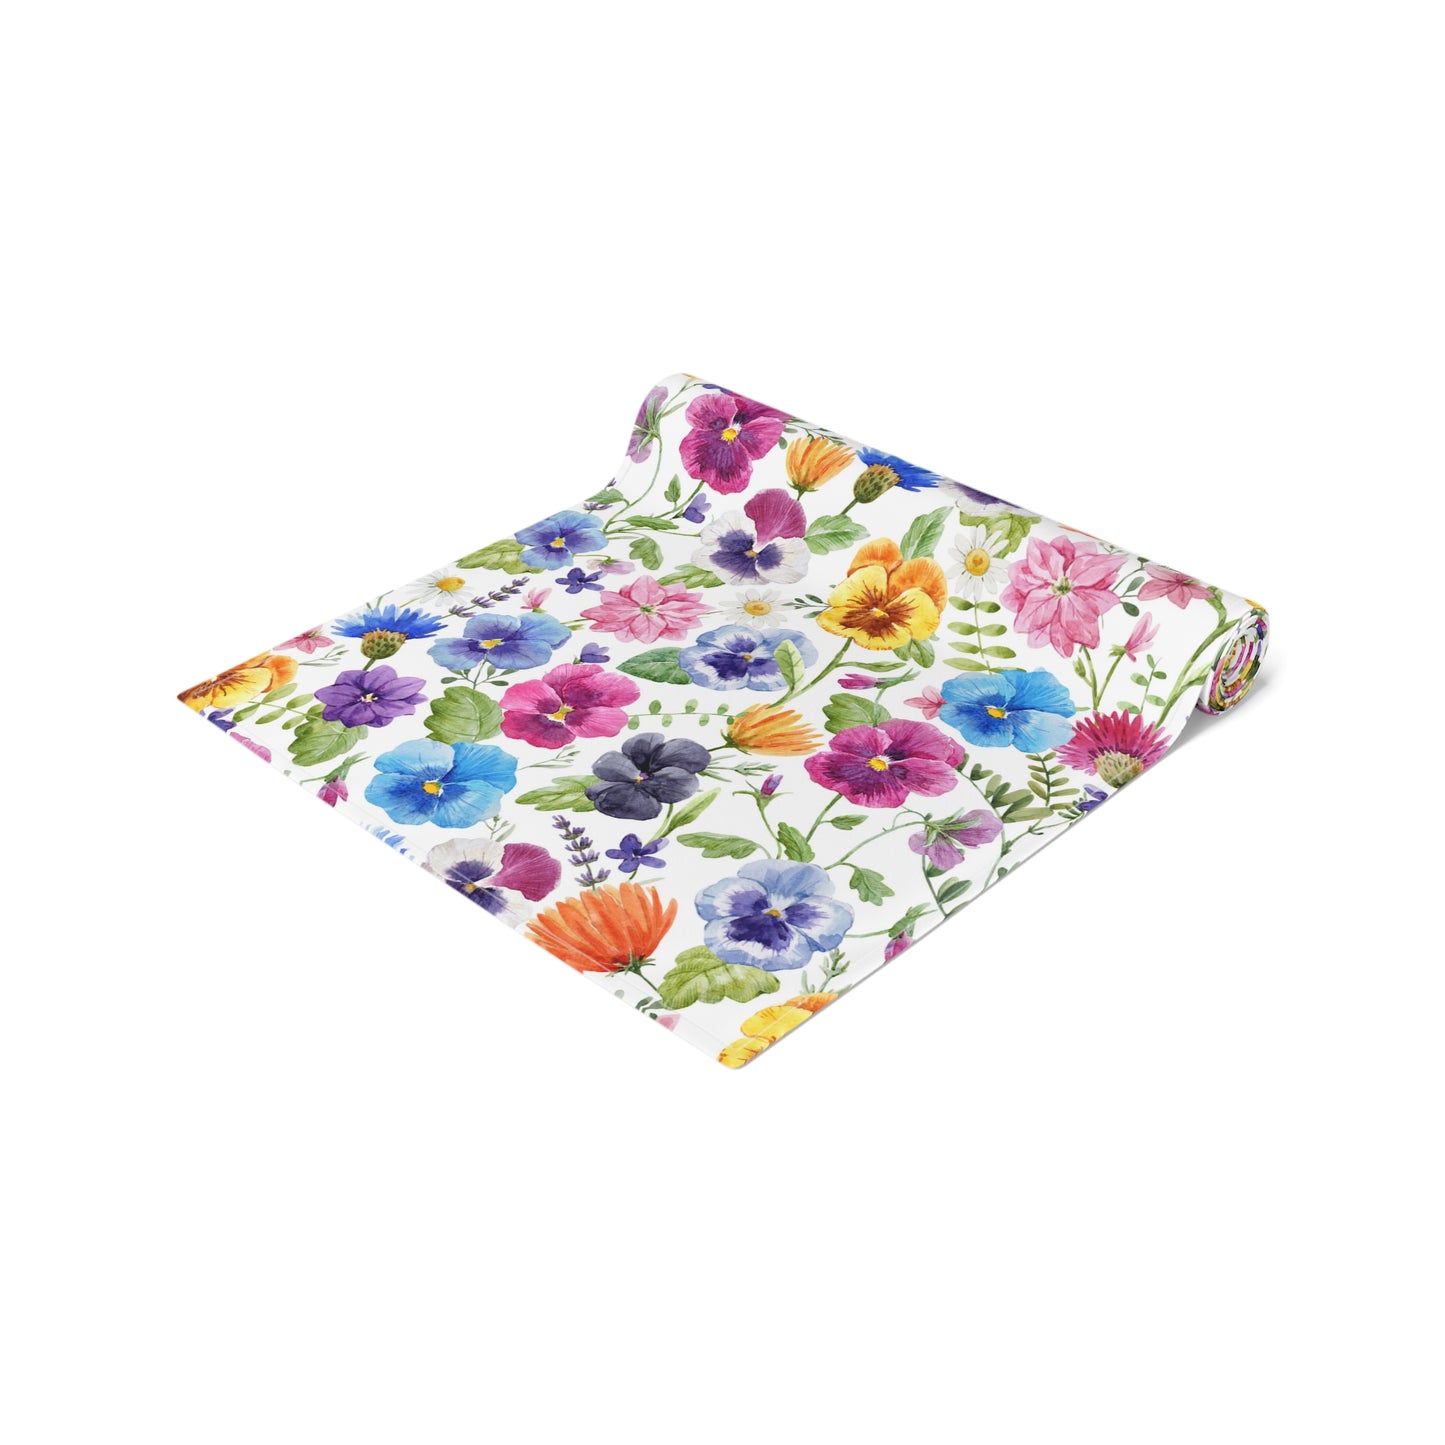 Floral Table Runner / Pansy Table Decor